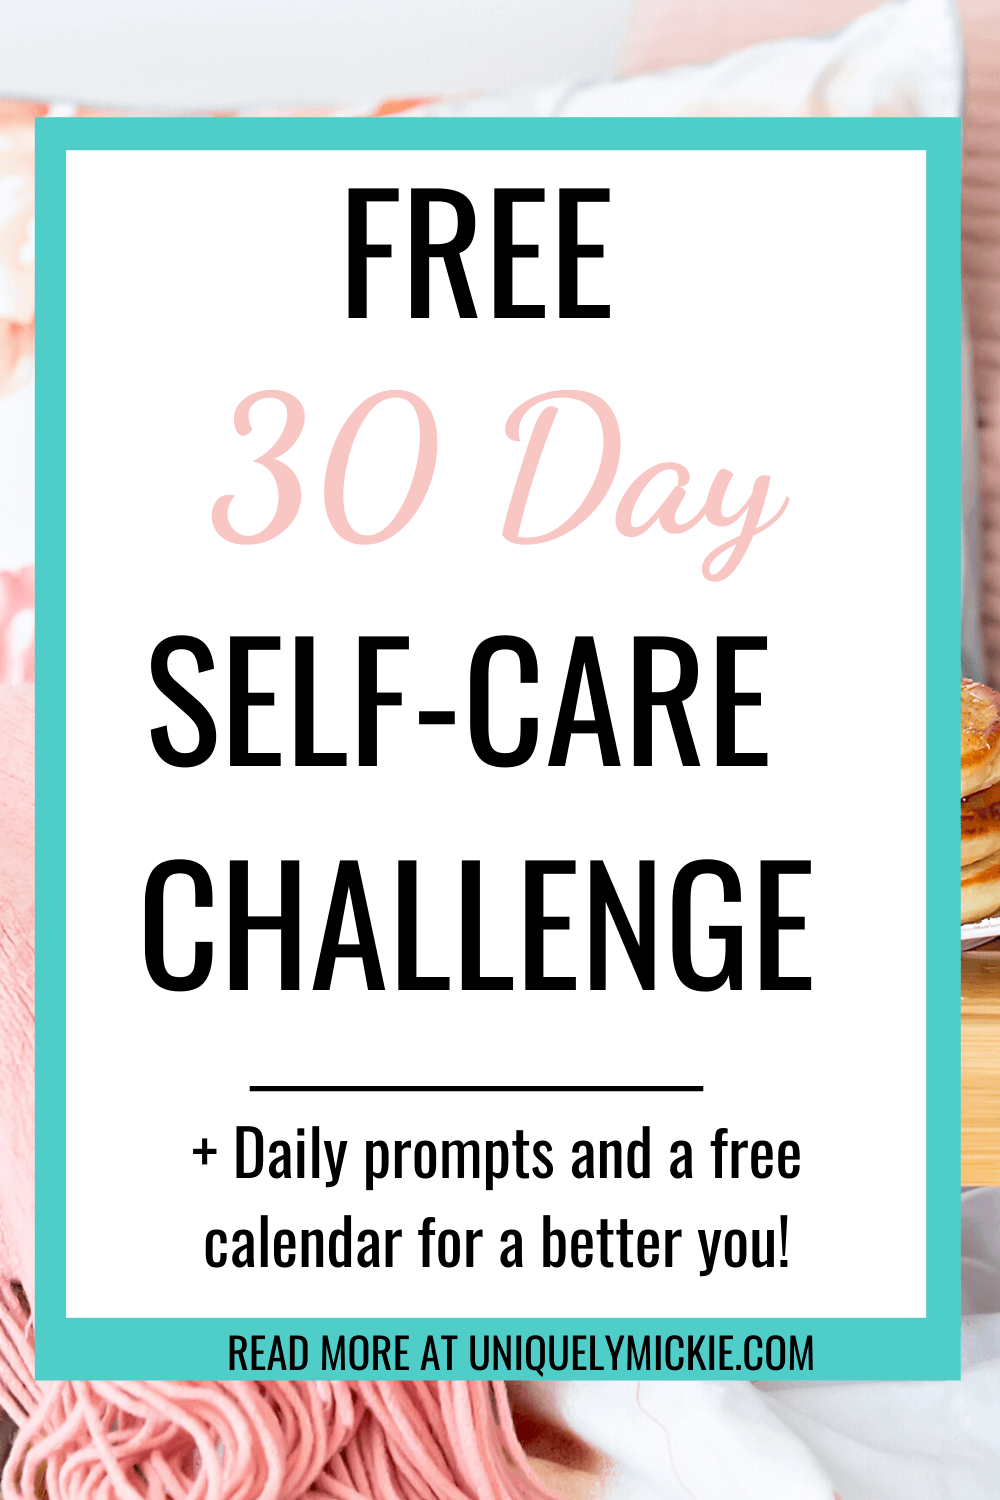 Are you stick and tired of being sick and tired? One thing that always helps to boost my mood is a little self-care. Read my latest blog post where I share an easy 30 day self-care challenge that you start today! 